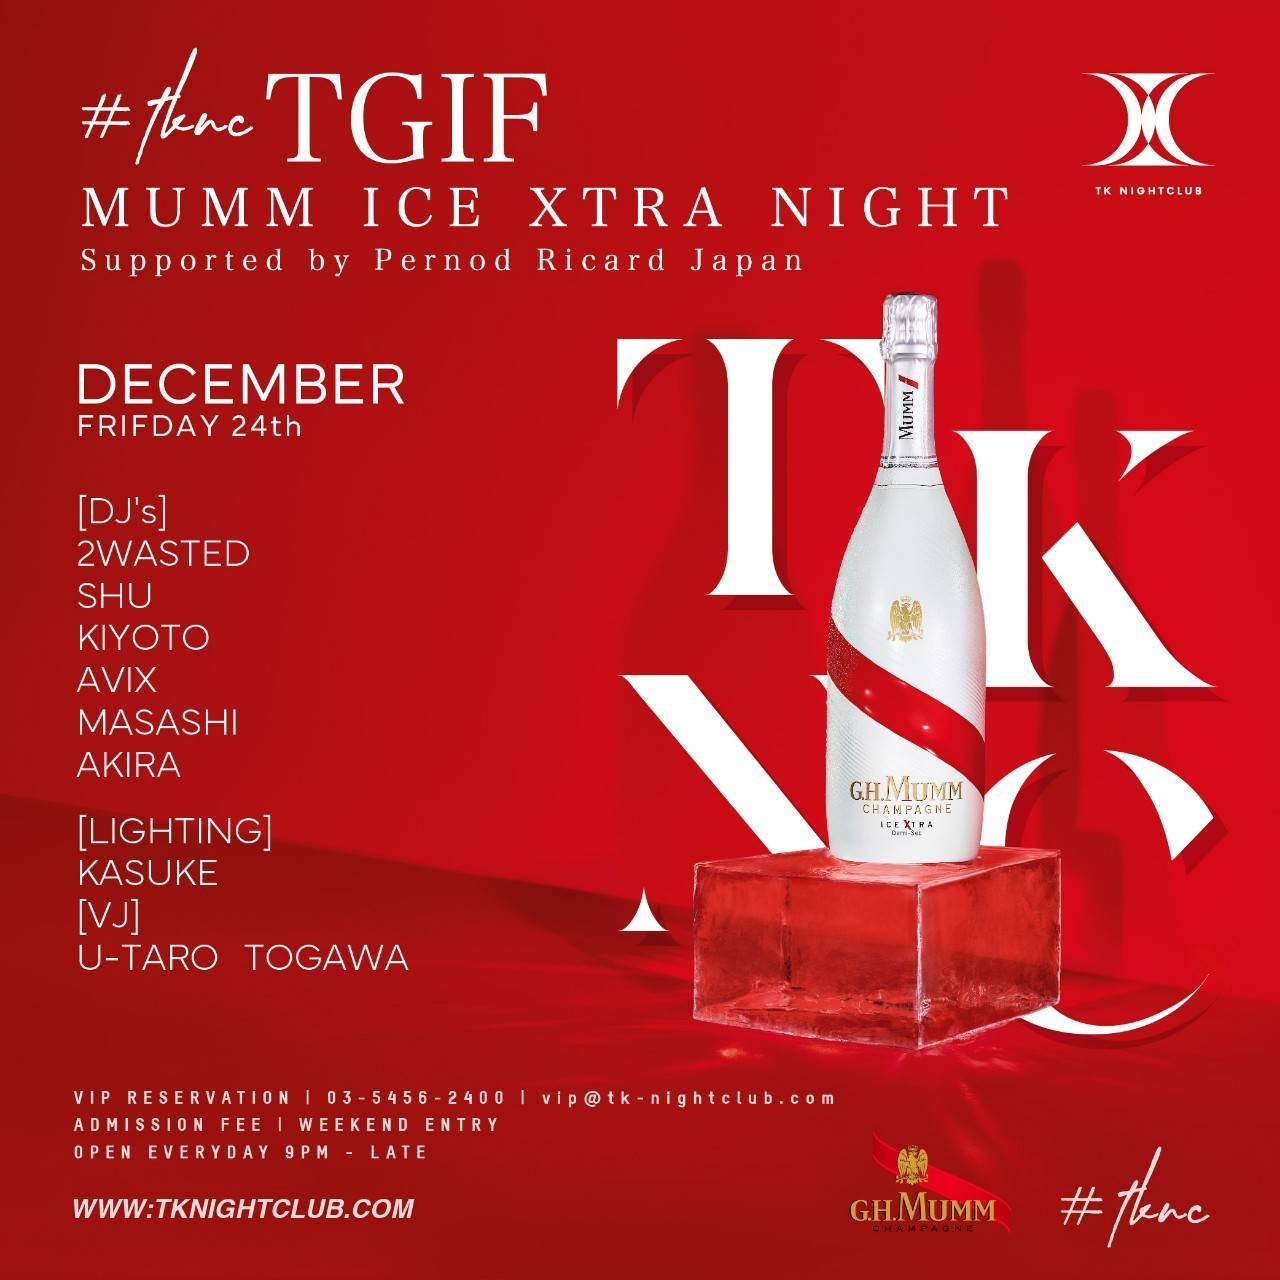 After Movie. TKNC,s TGIF MUMM ICE XTRA NIGHT Supported by Pernod Ricard Japan